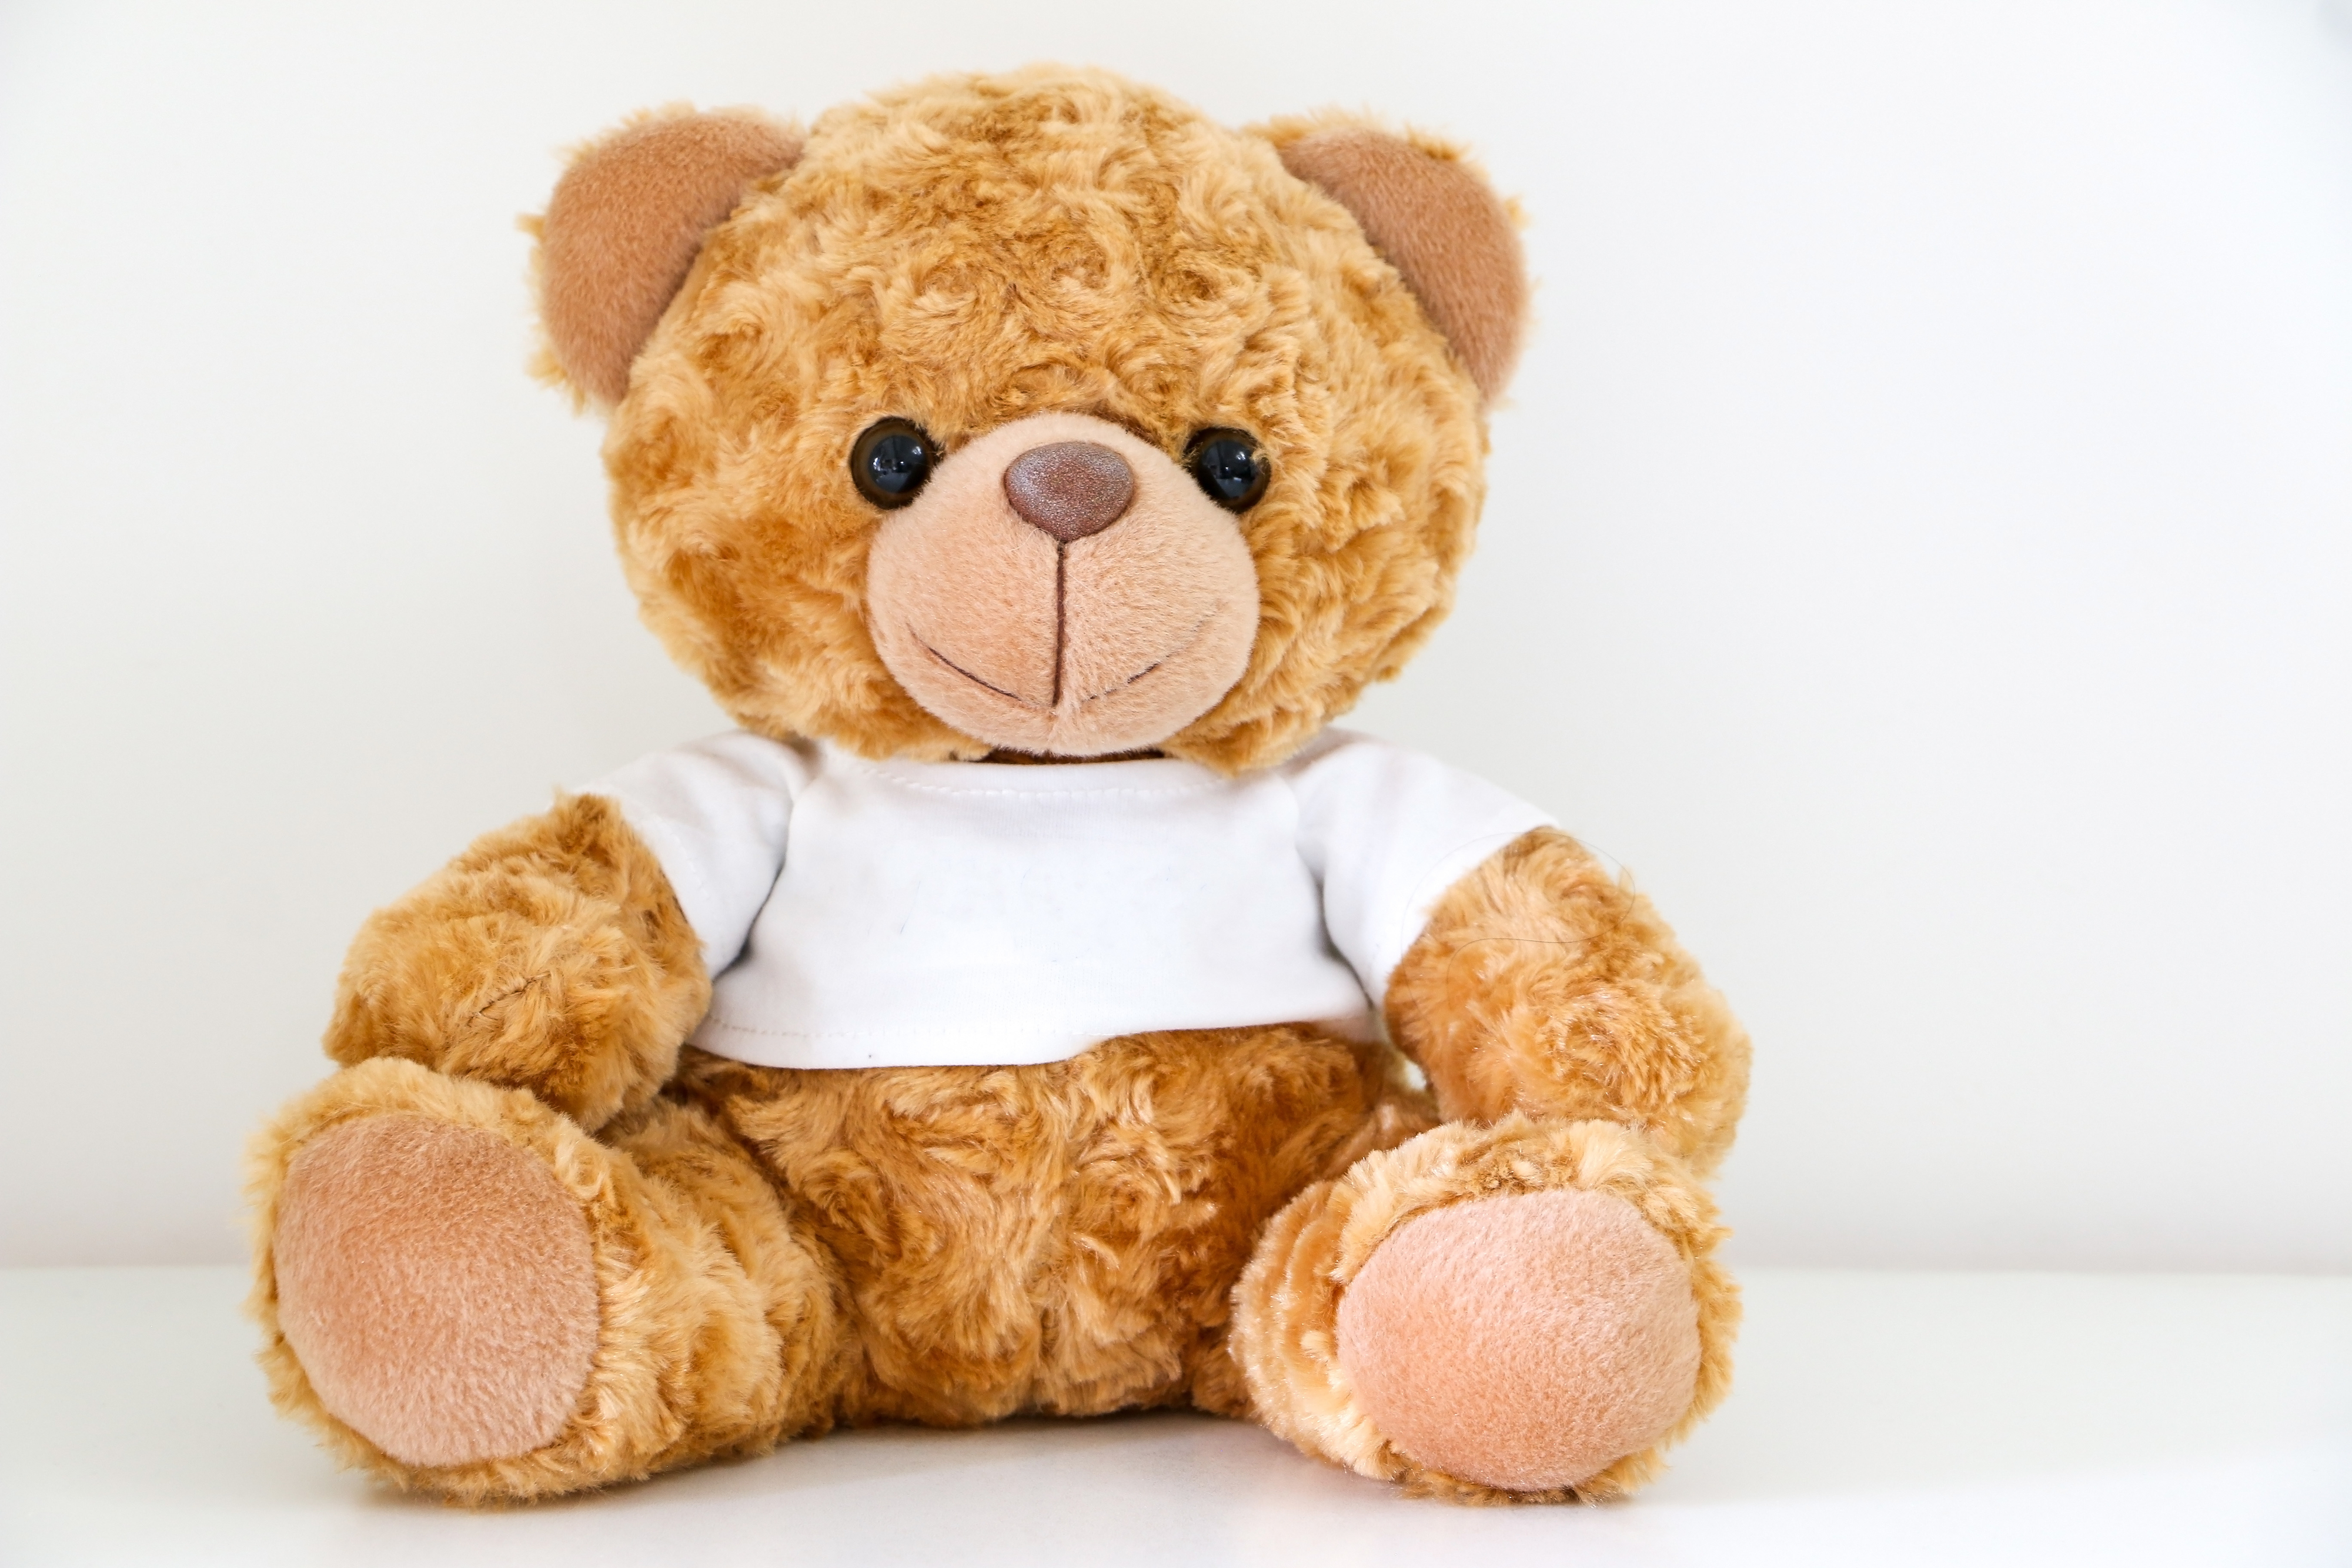 A plush teddy bear sitting against a plain background, wearing a white shirt, related to travel-themed content